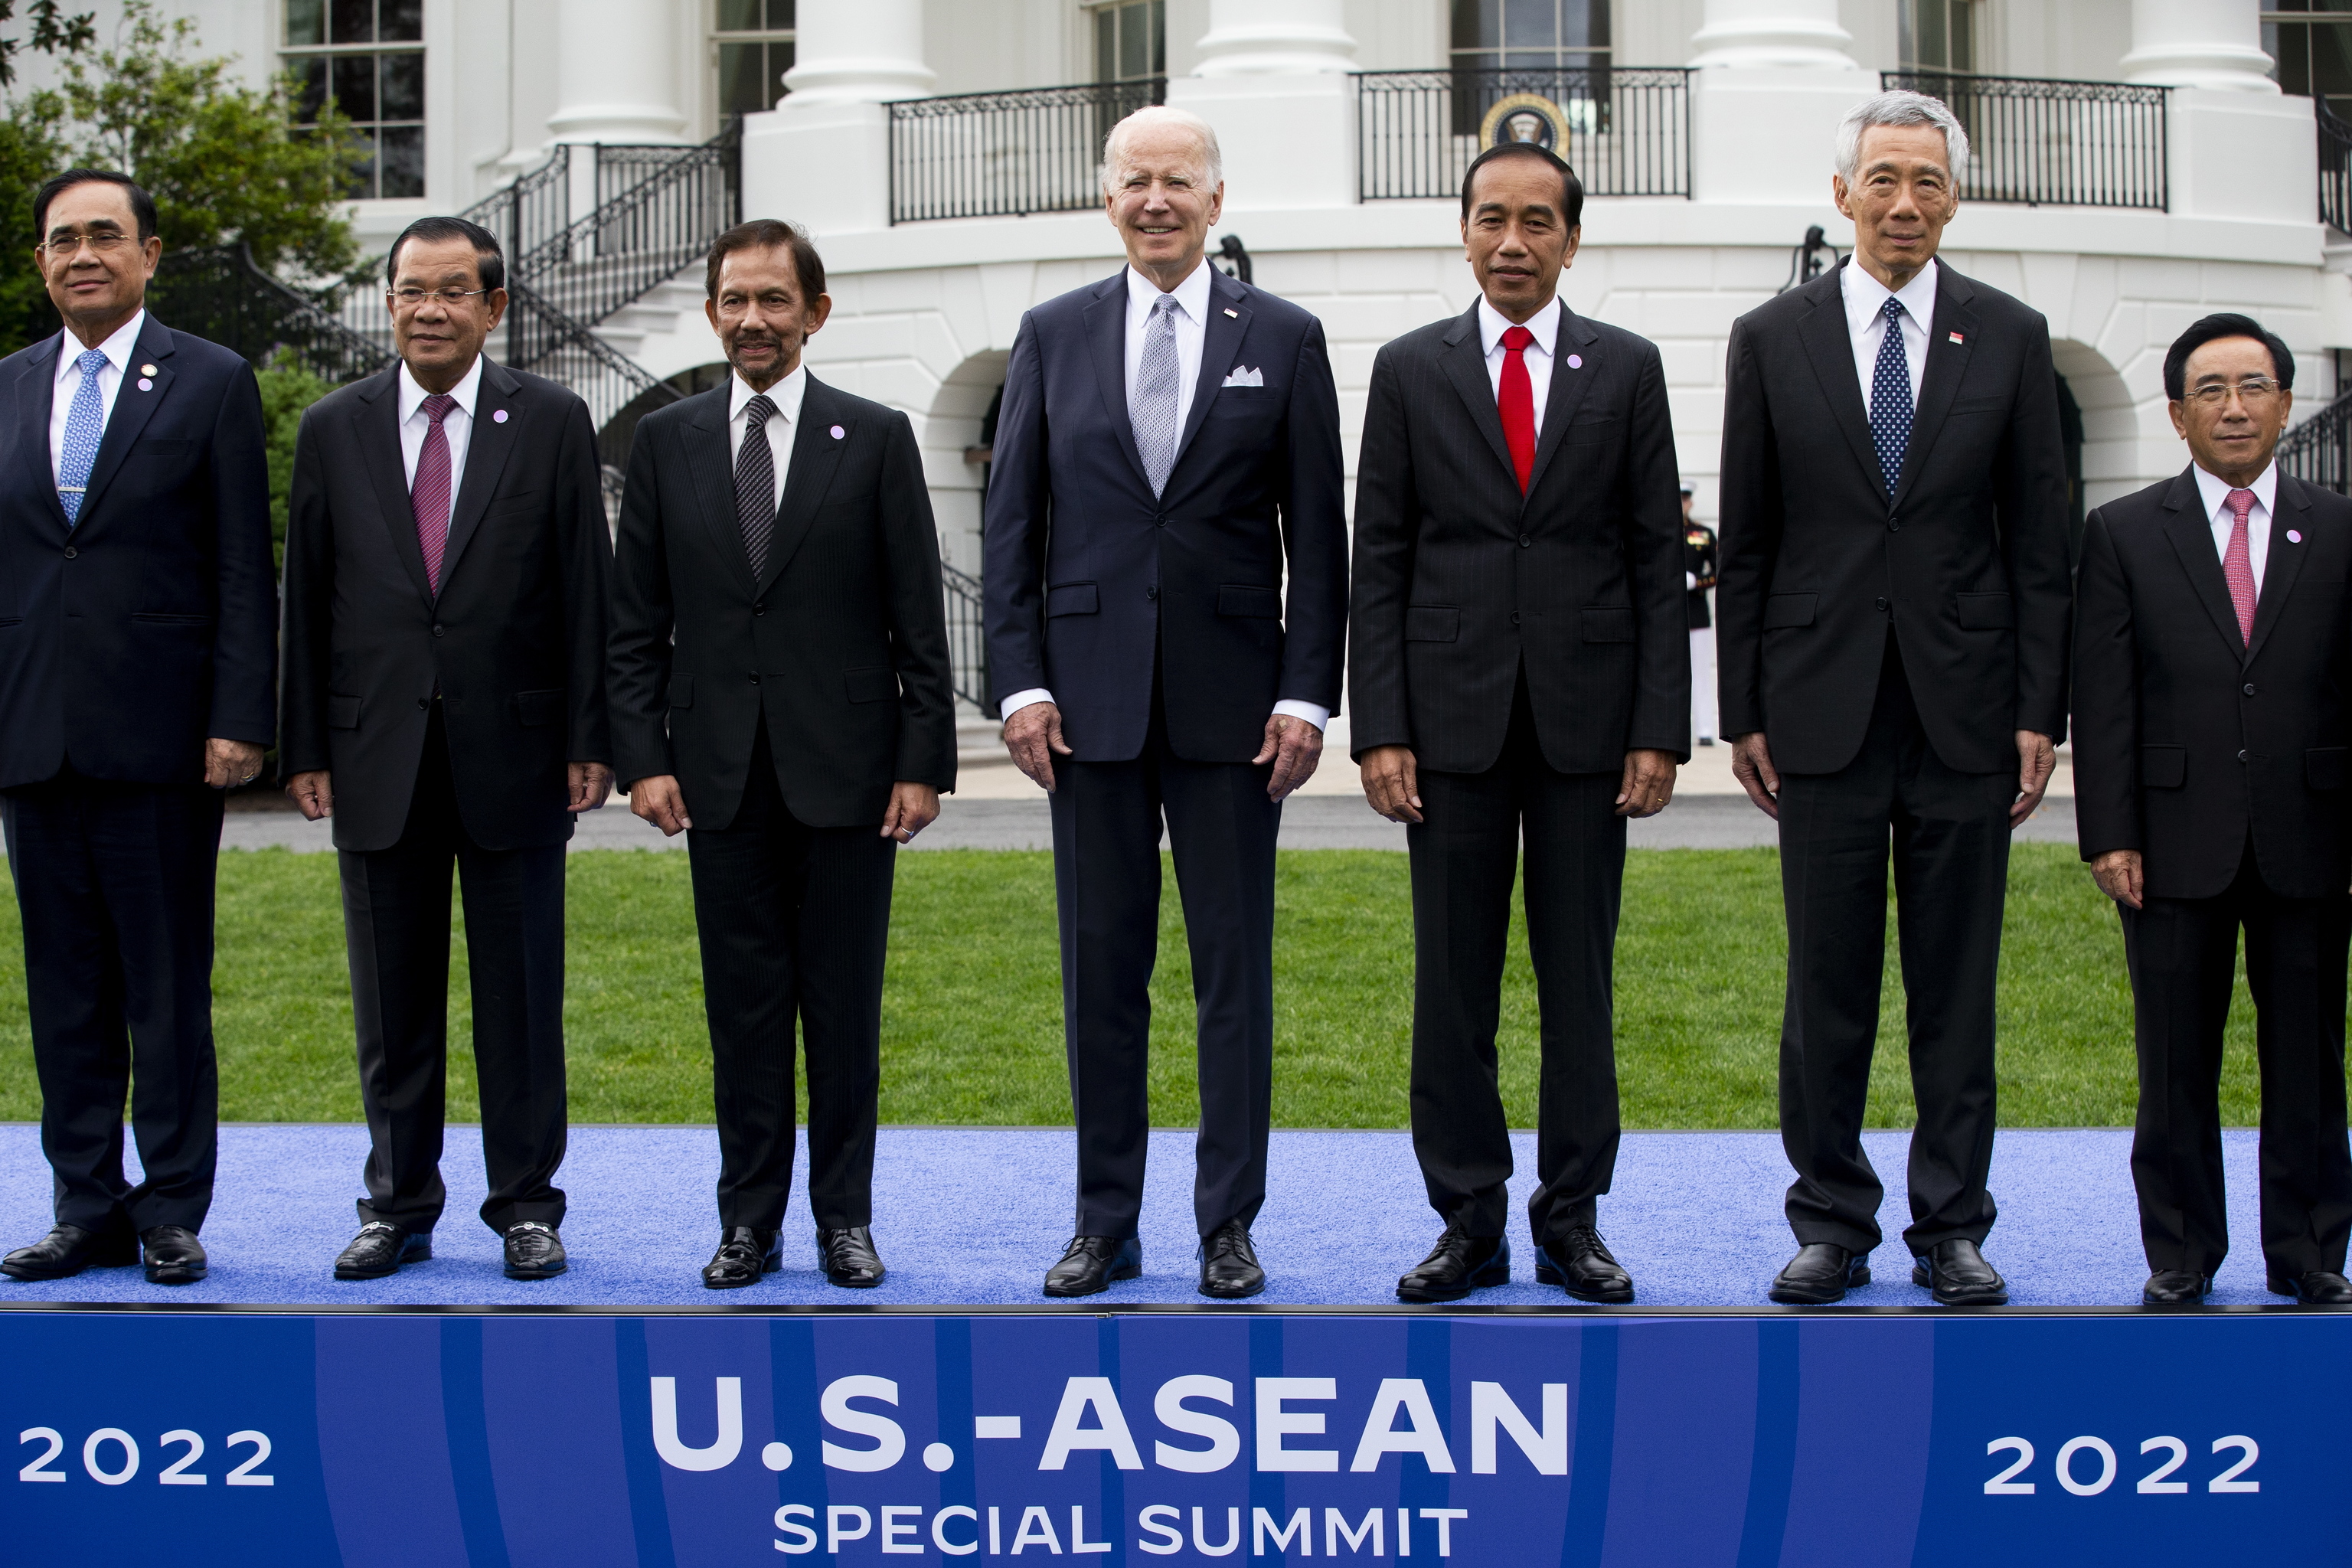 US President Joe Biden (center) poses for a family photo with ASEAN leaders.